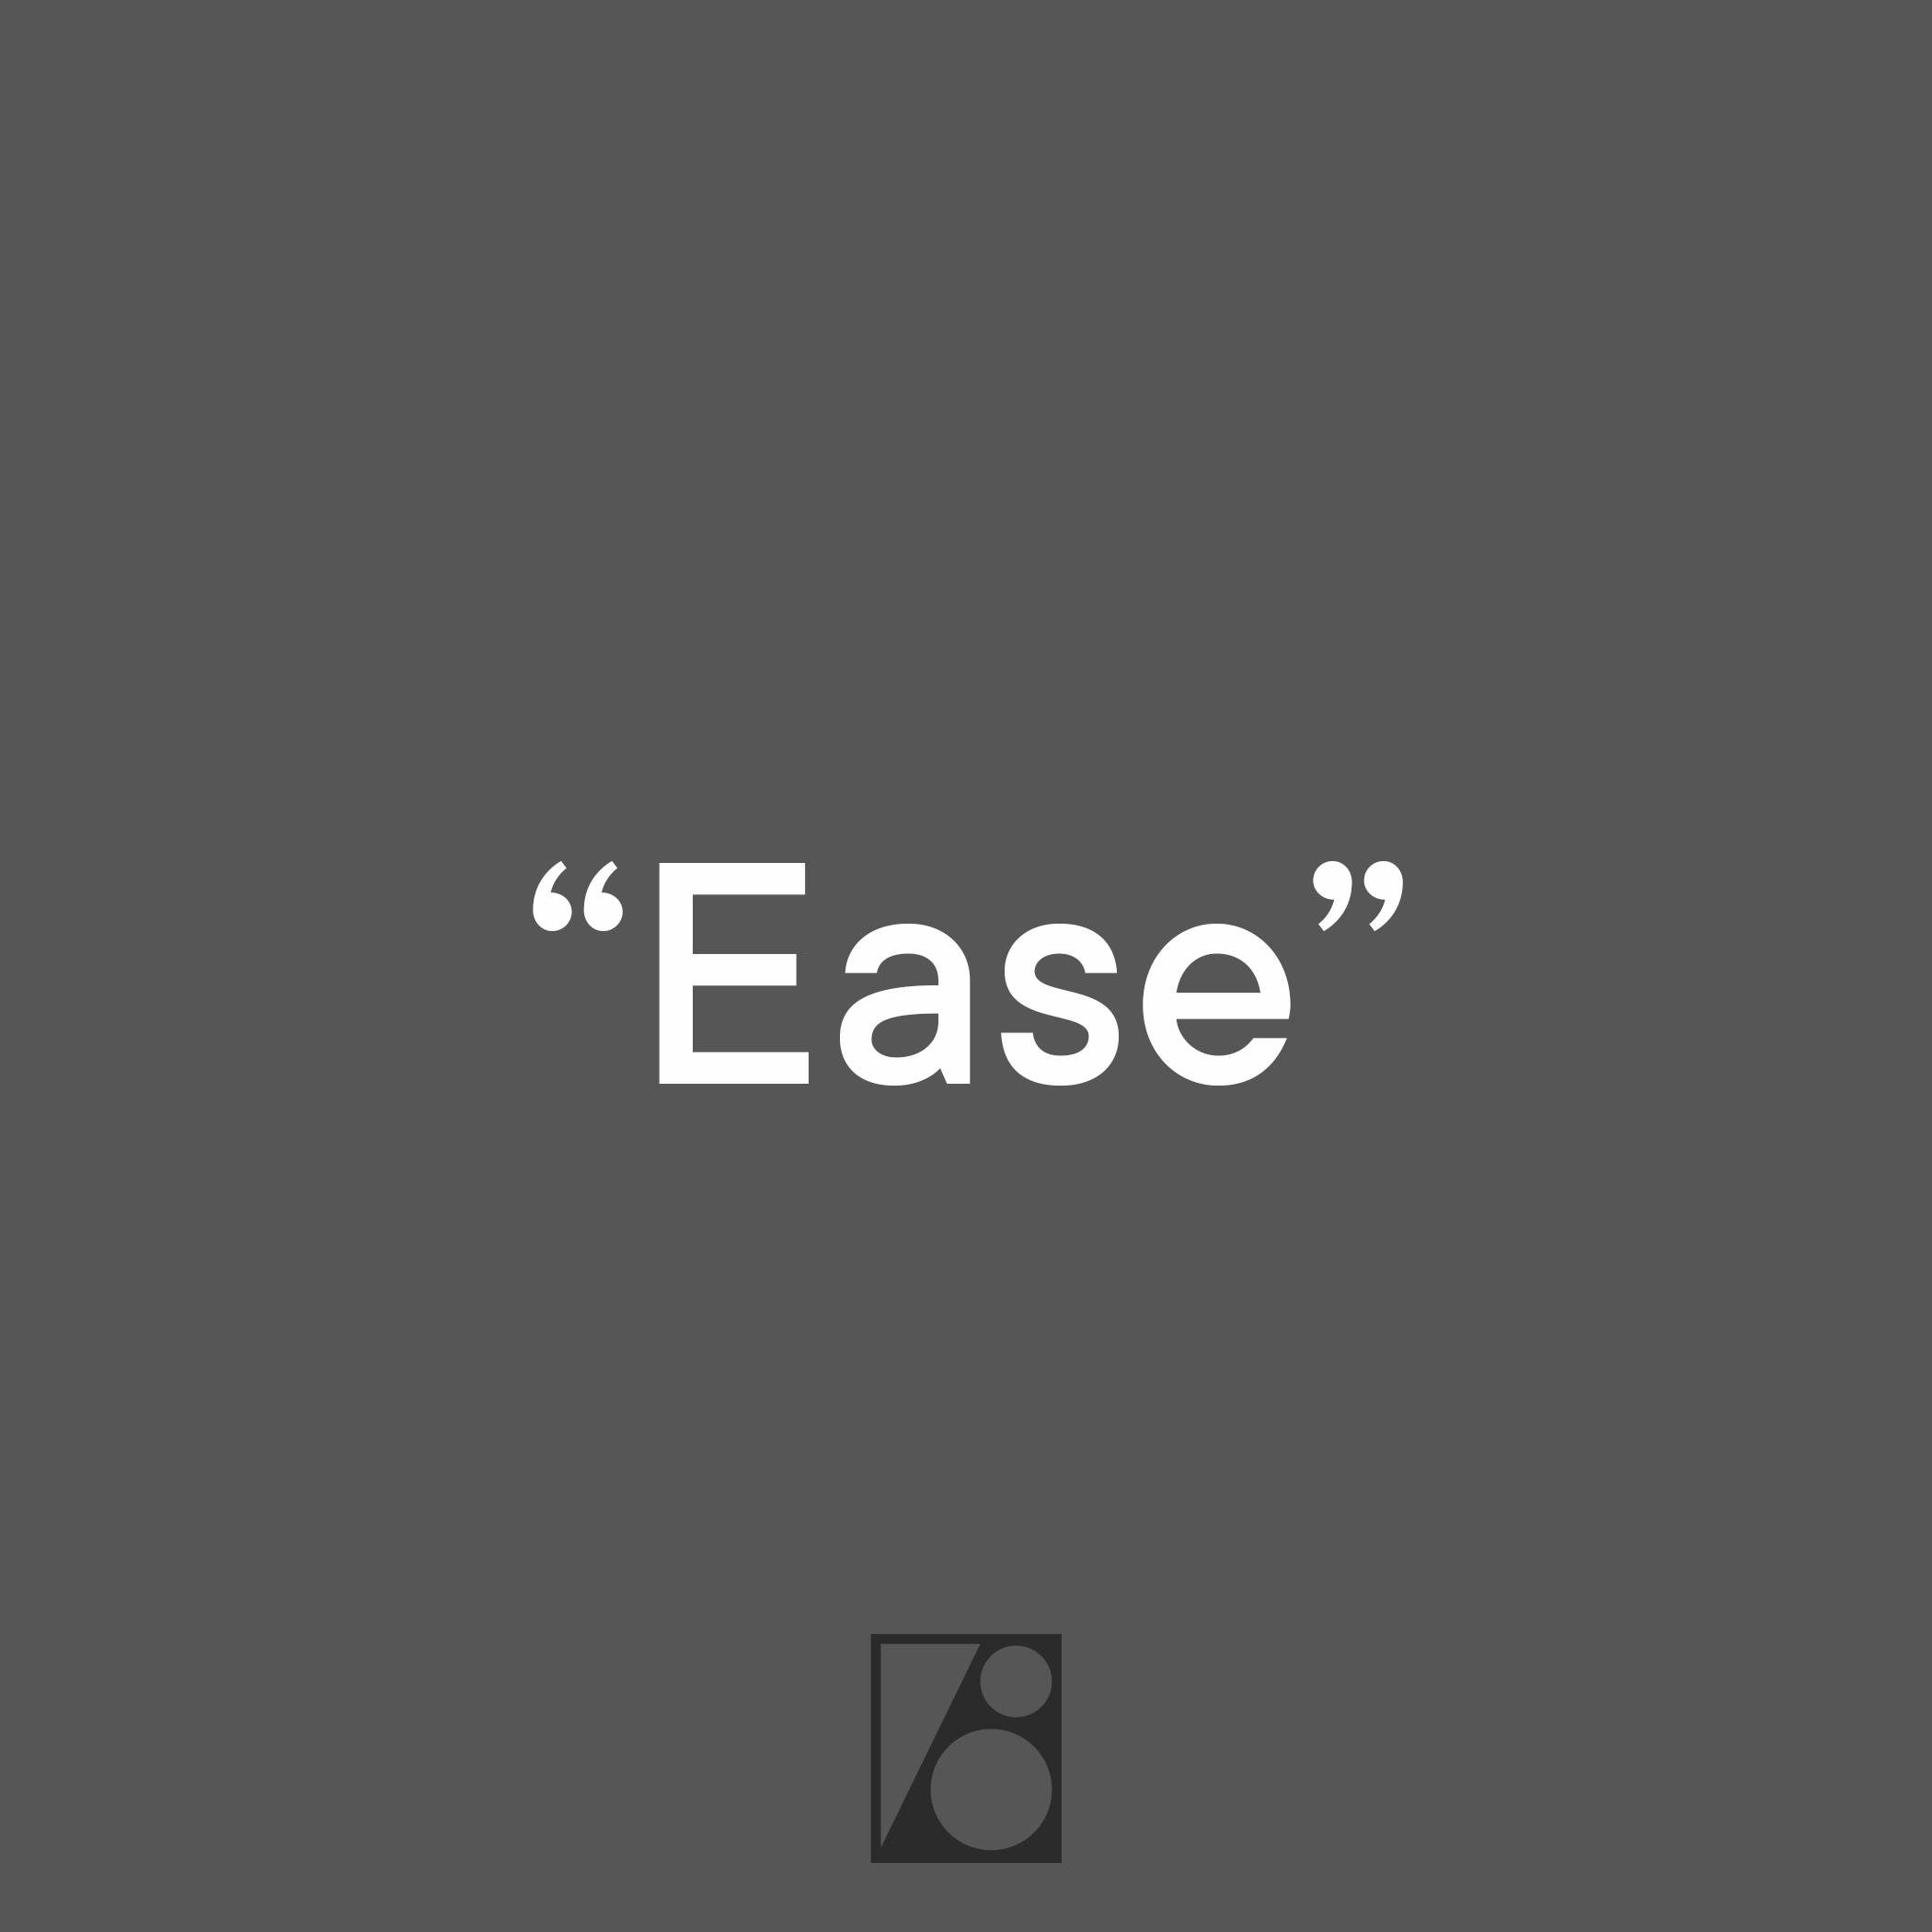 What is Ease?